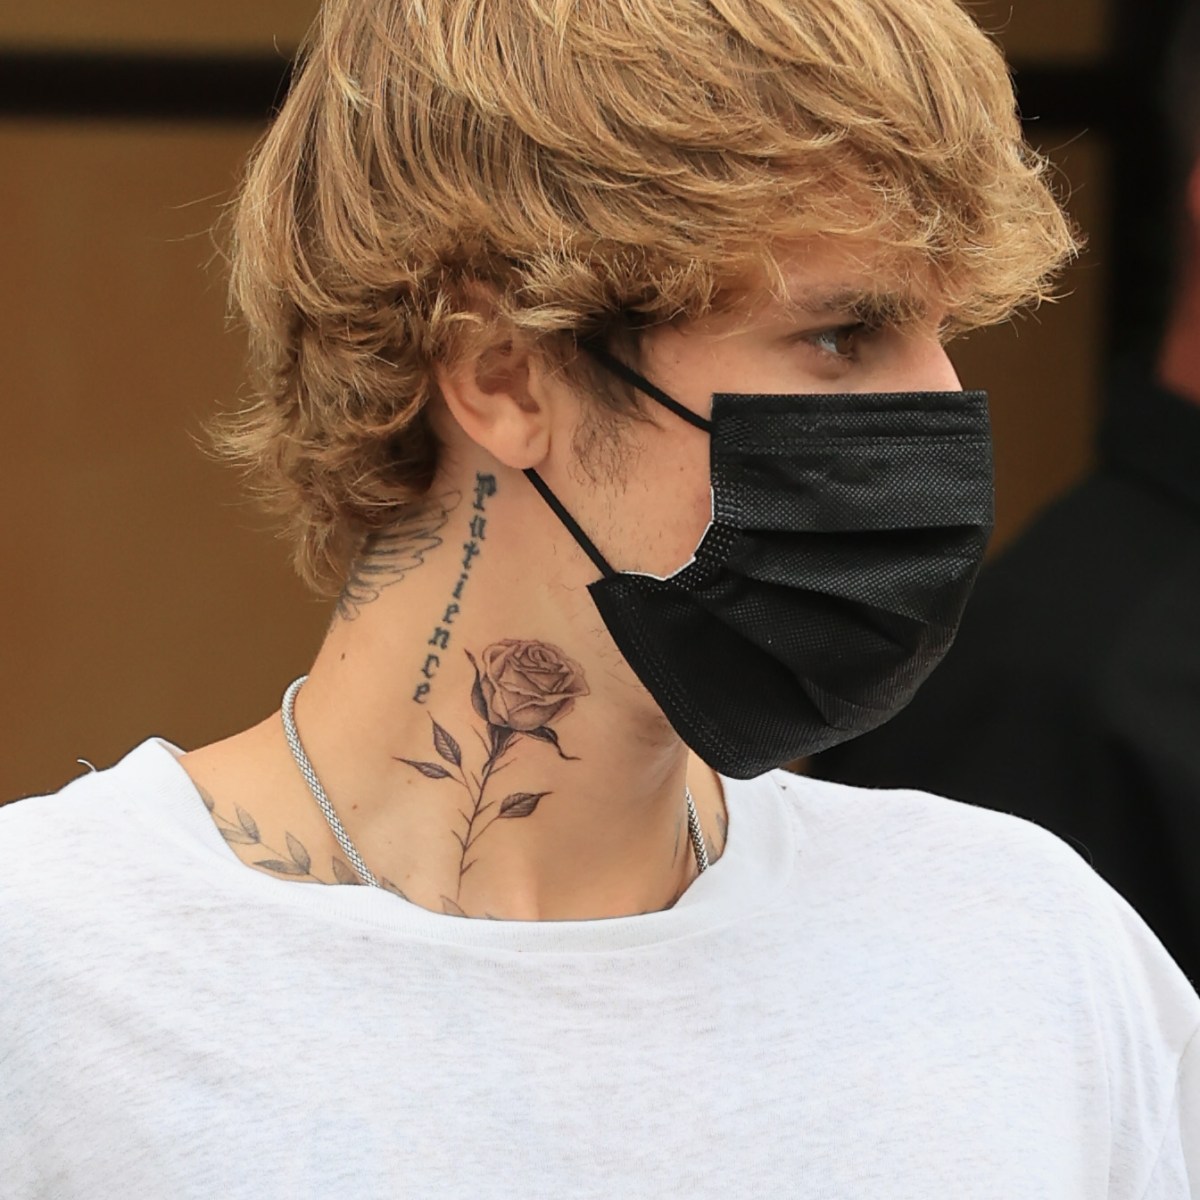 Justin Bieber Flaunts Neck Tattoo While With Hailey Baldwin